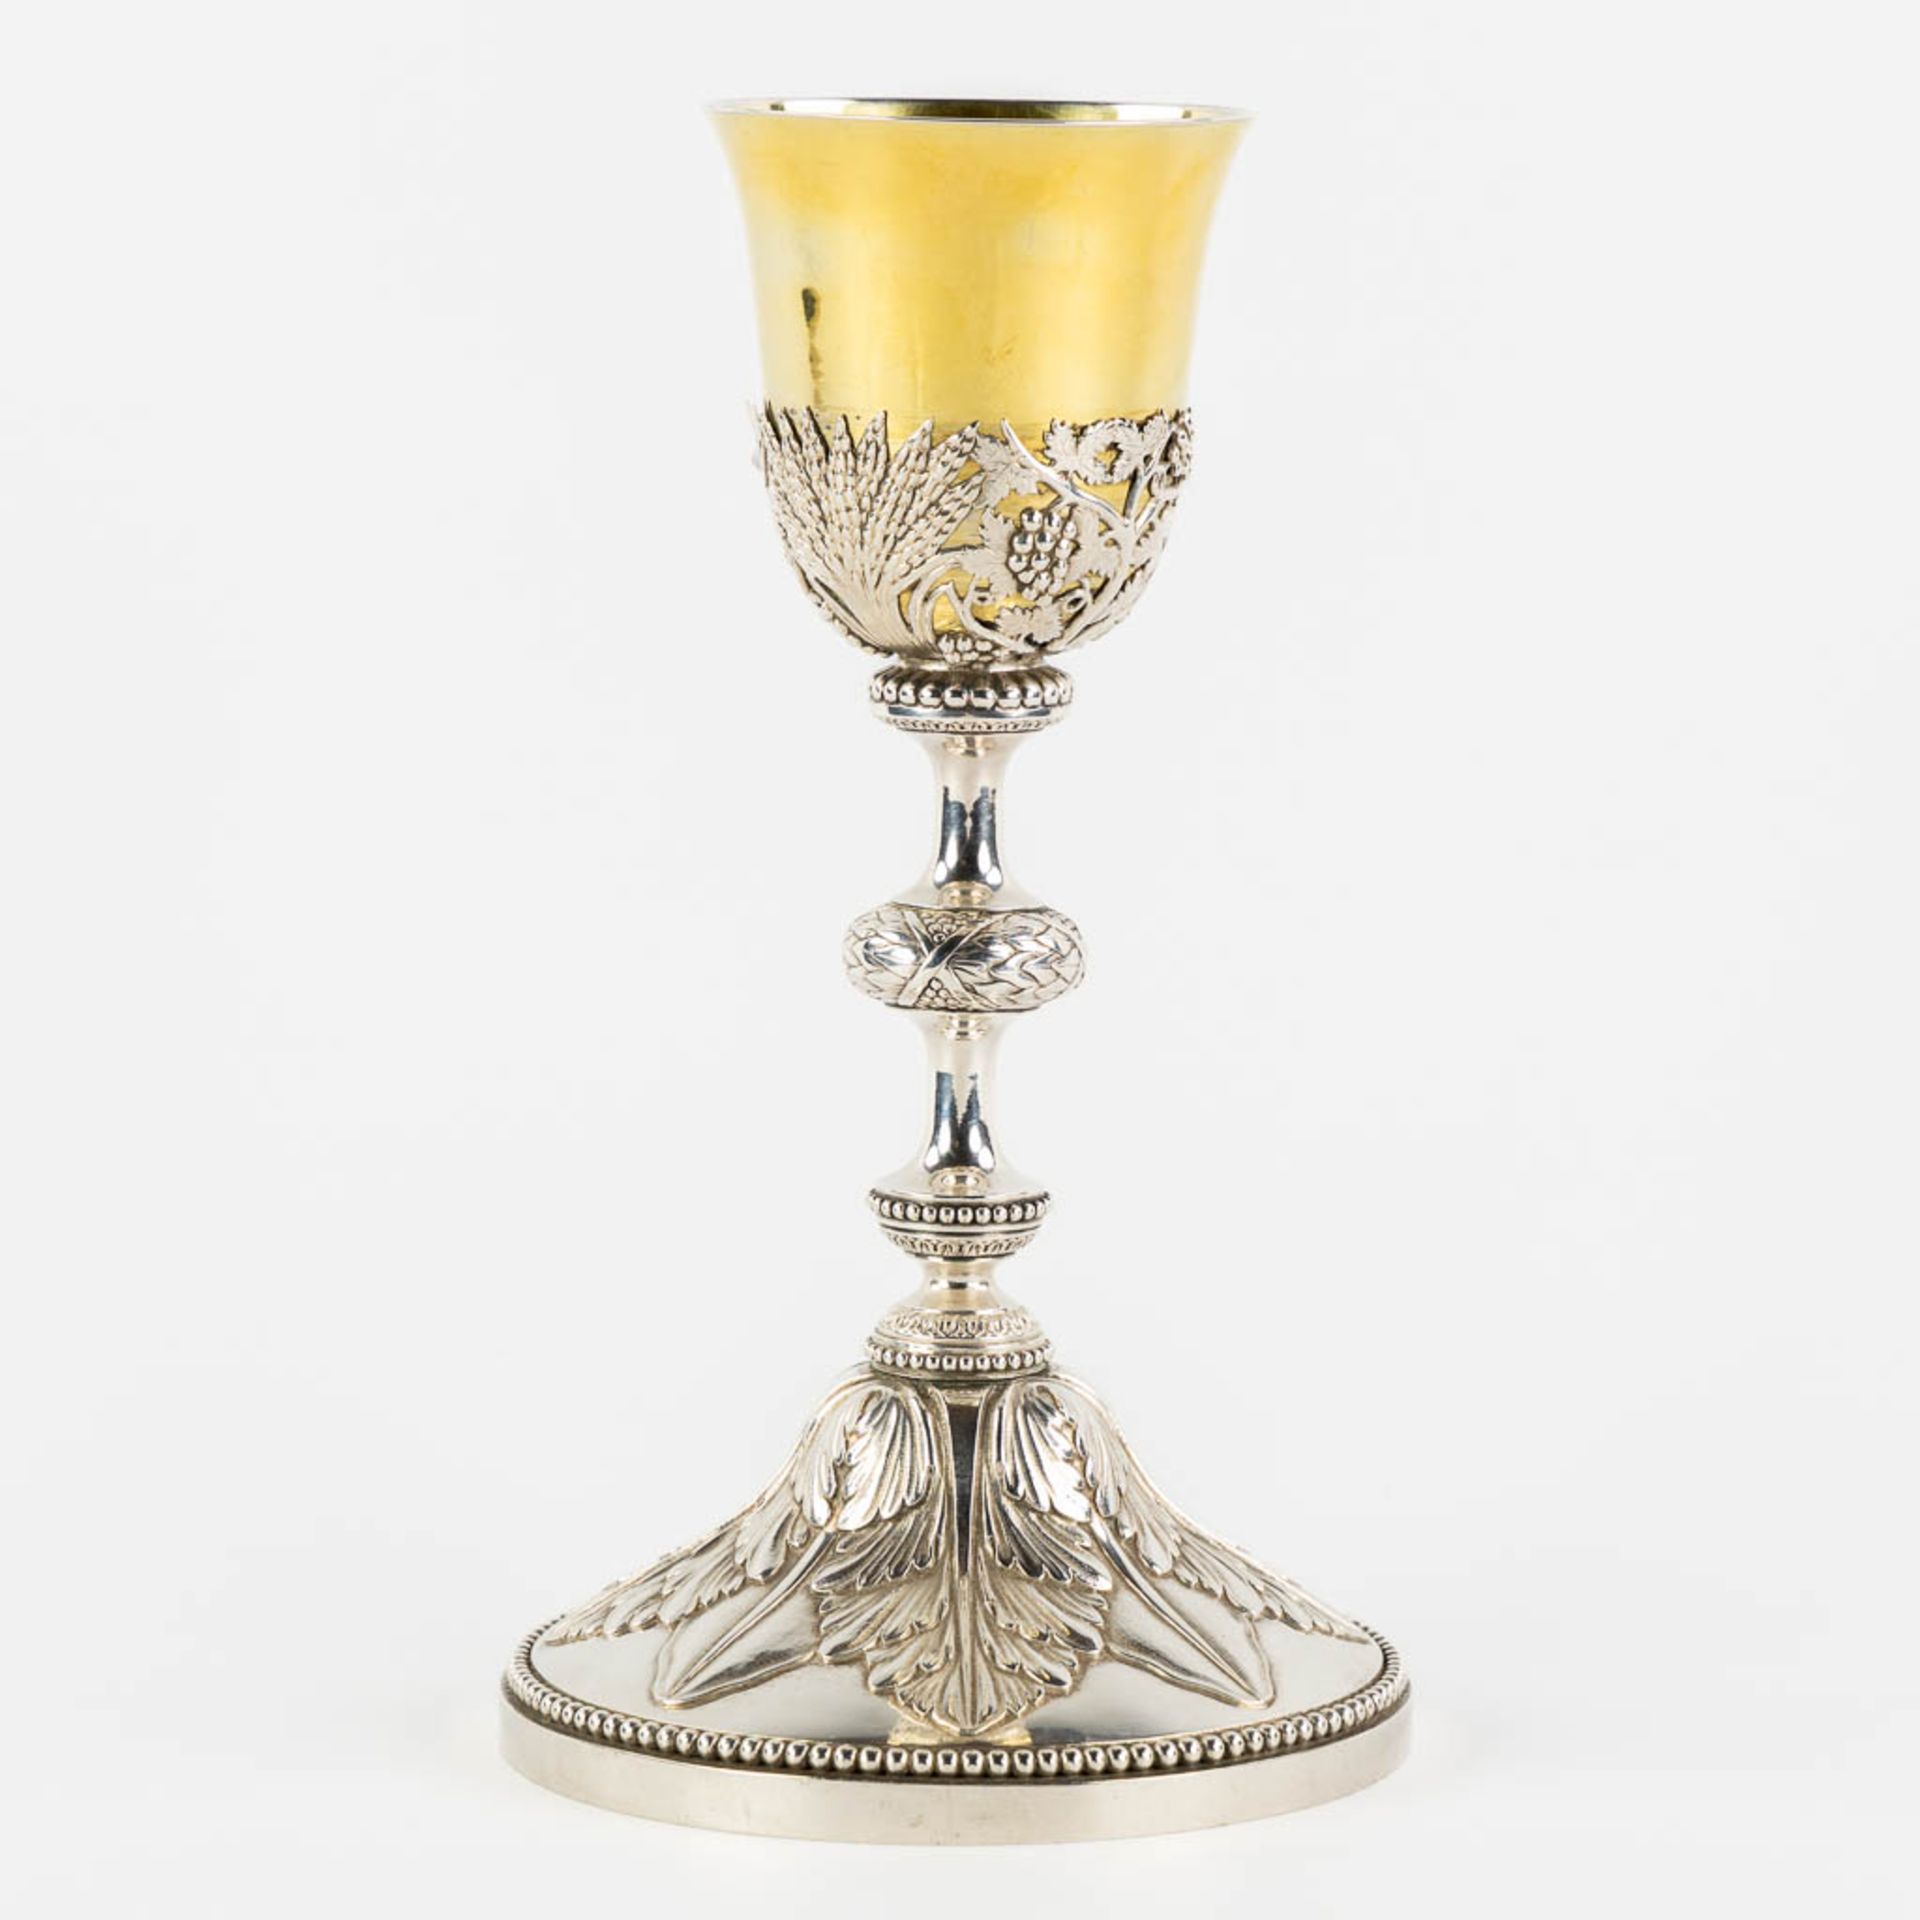 A chalice, silver-plated metal and gold-plated silver, Gothic Revival. 19th C. (H:27 x D:15 cm) - Image 4 of 9